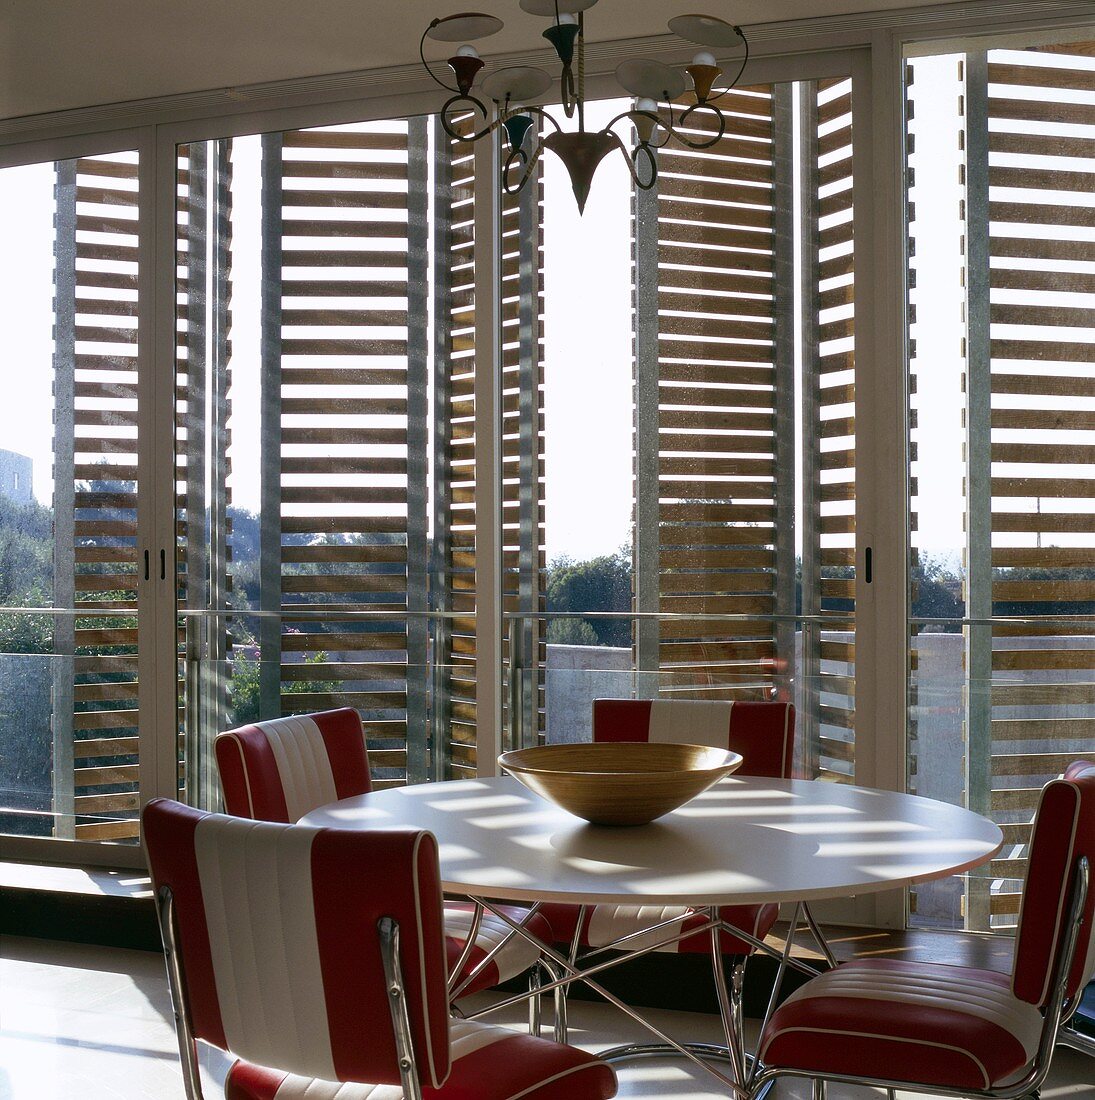 A round table and chairs in front of terrace windows with wooden shutters